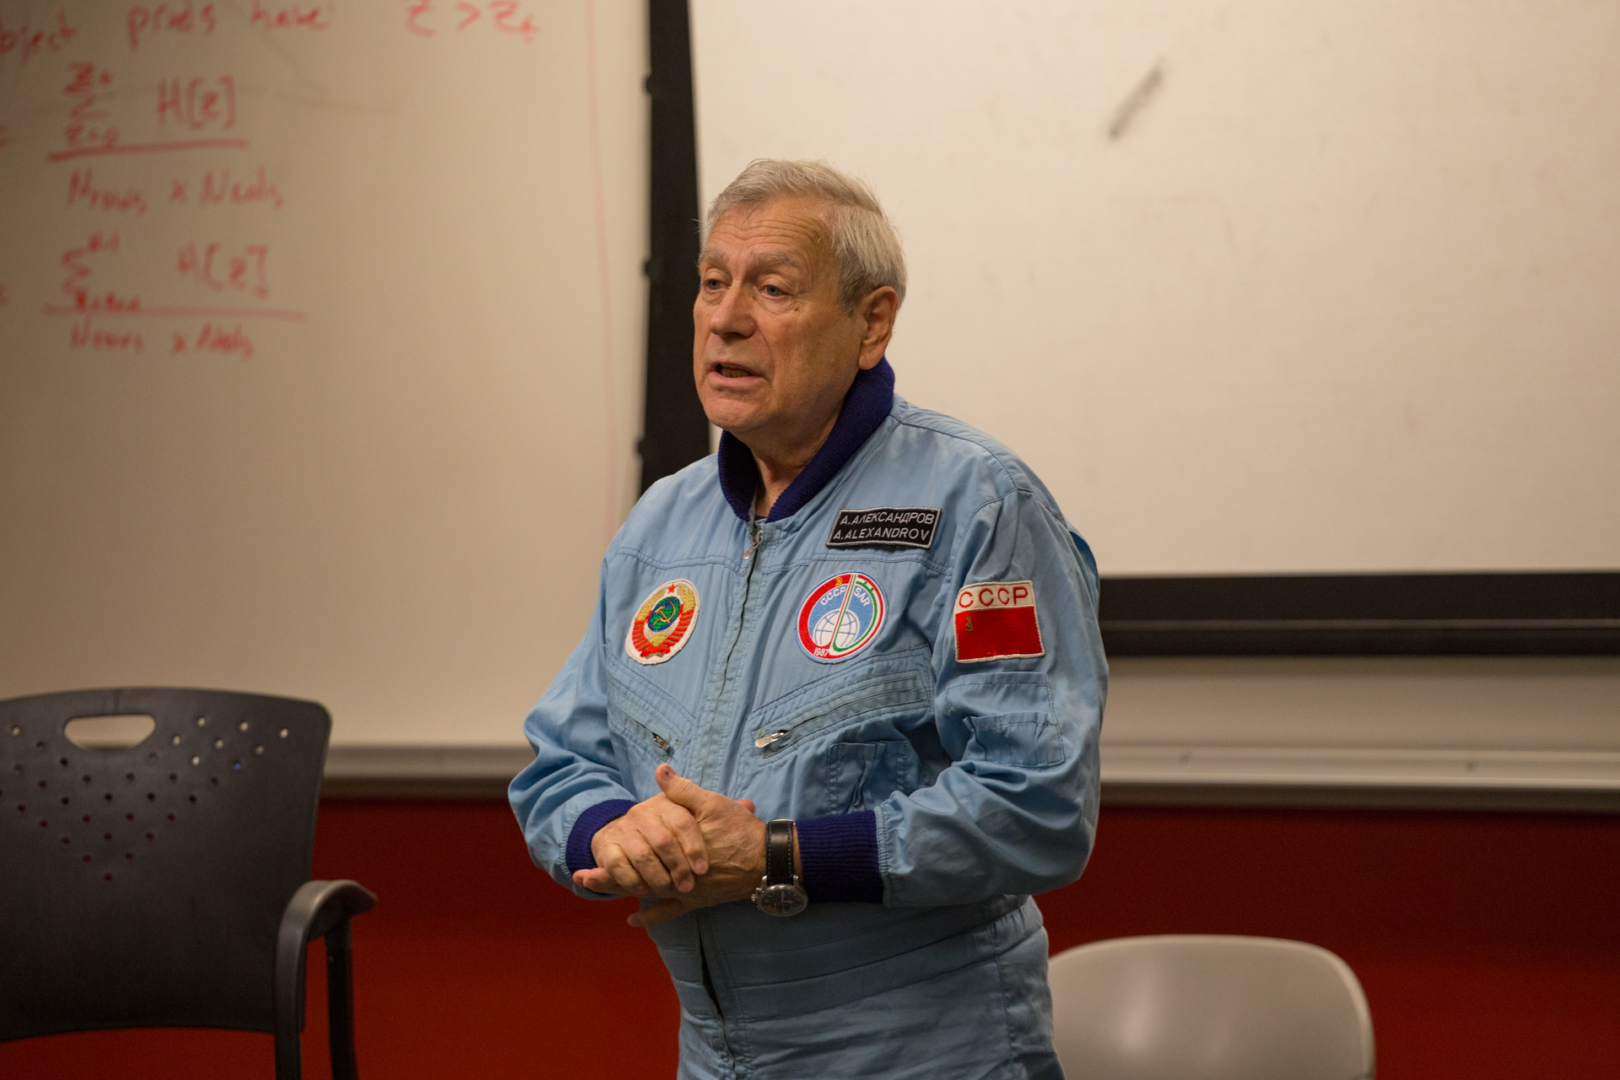 Space explorers share life stories with students - The Cougar